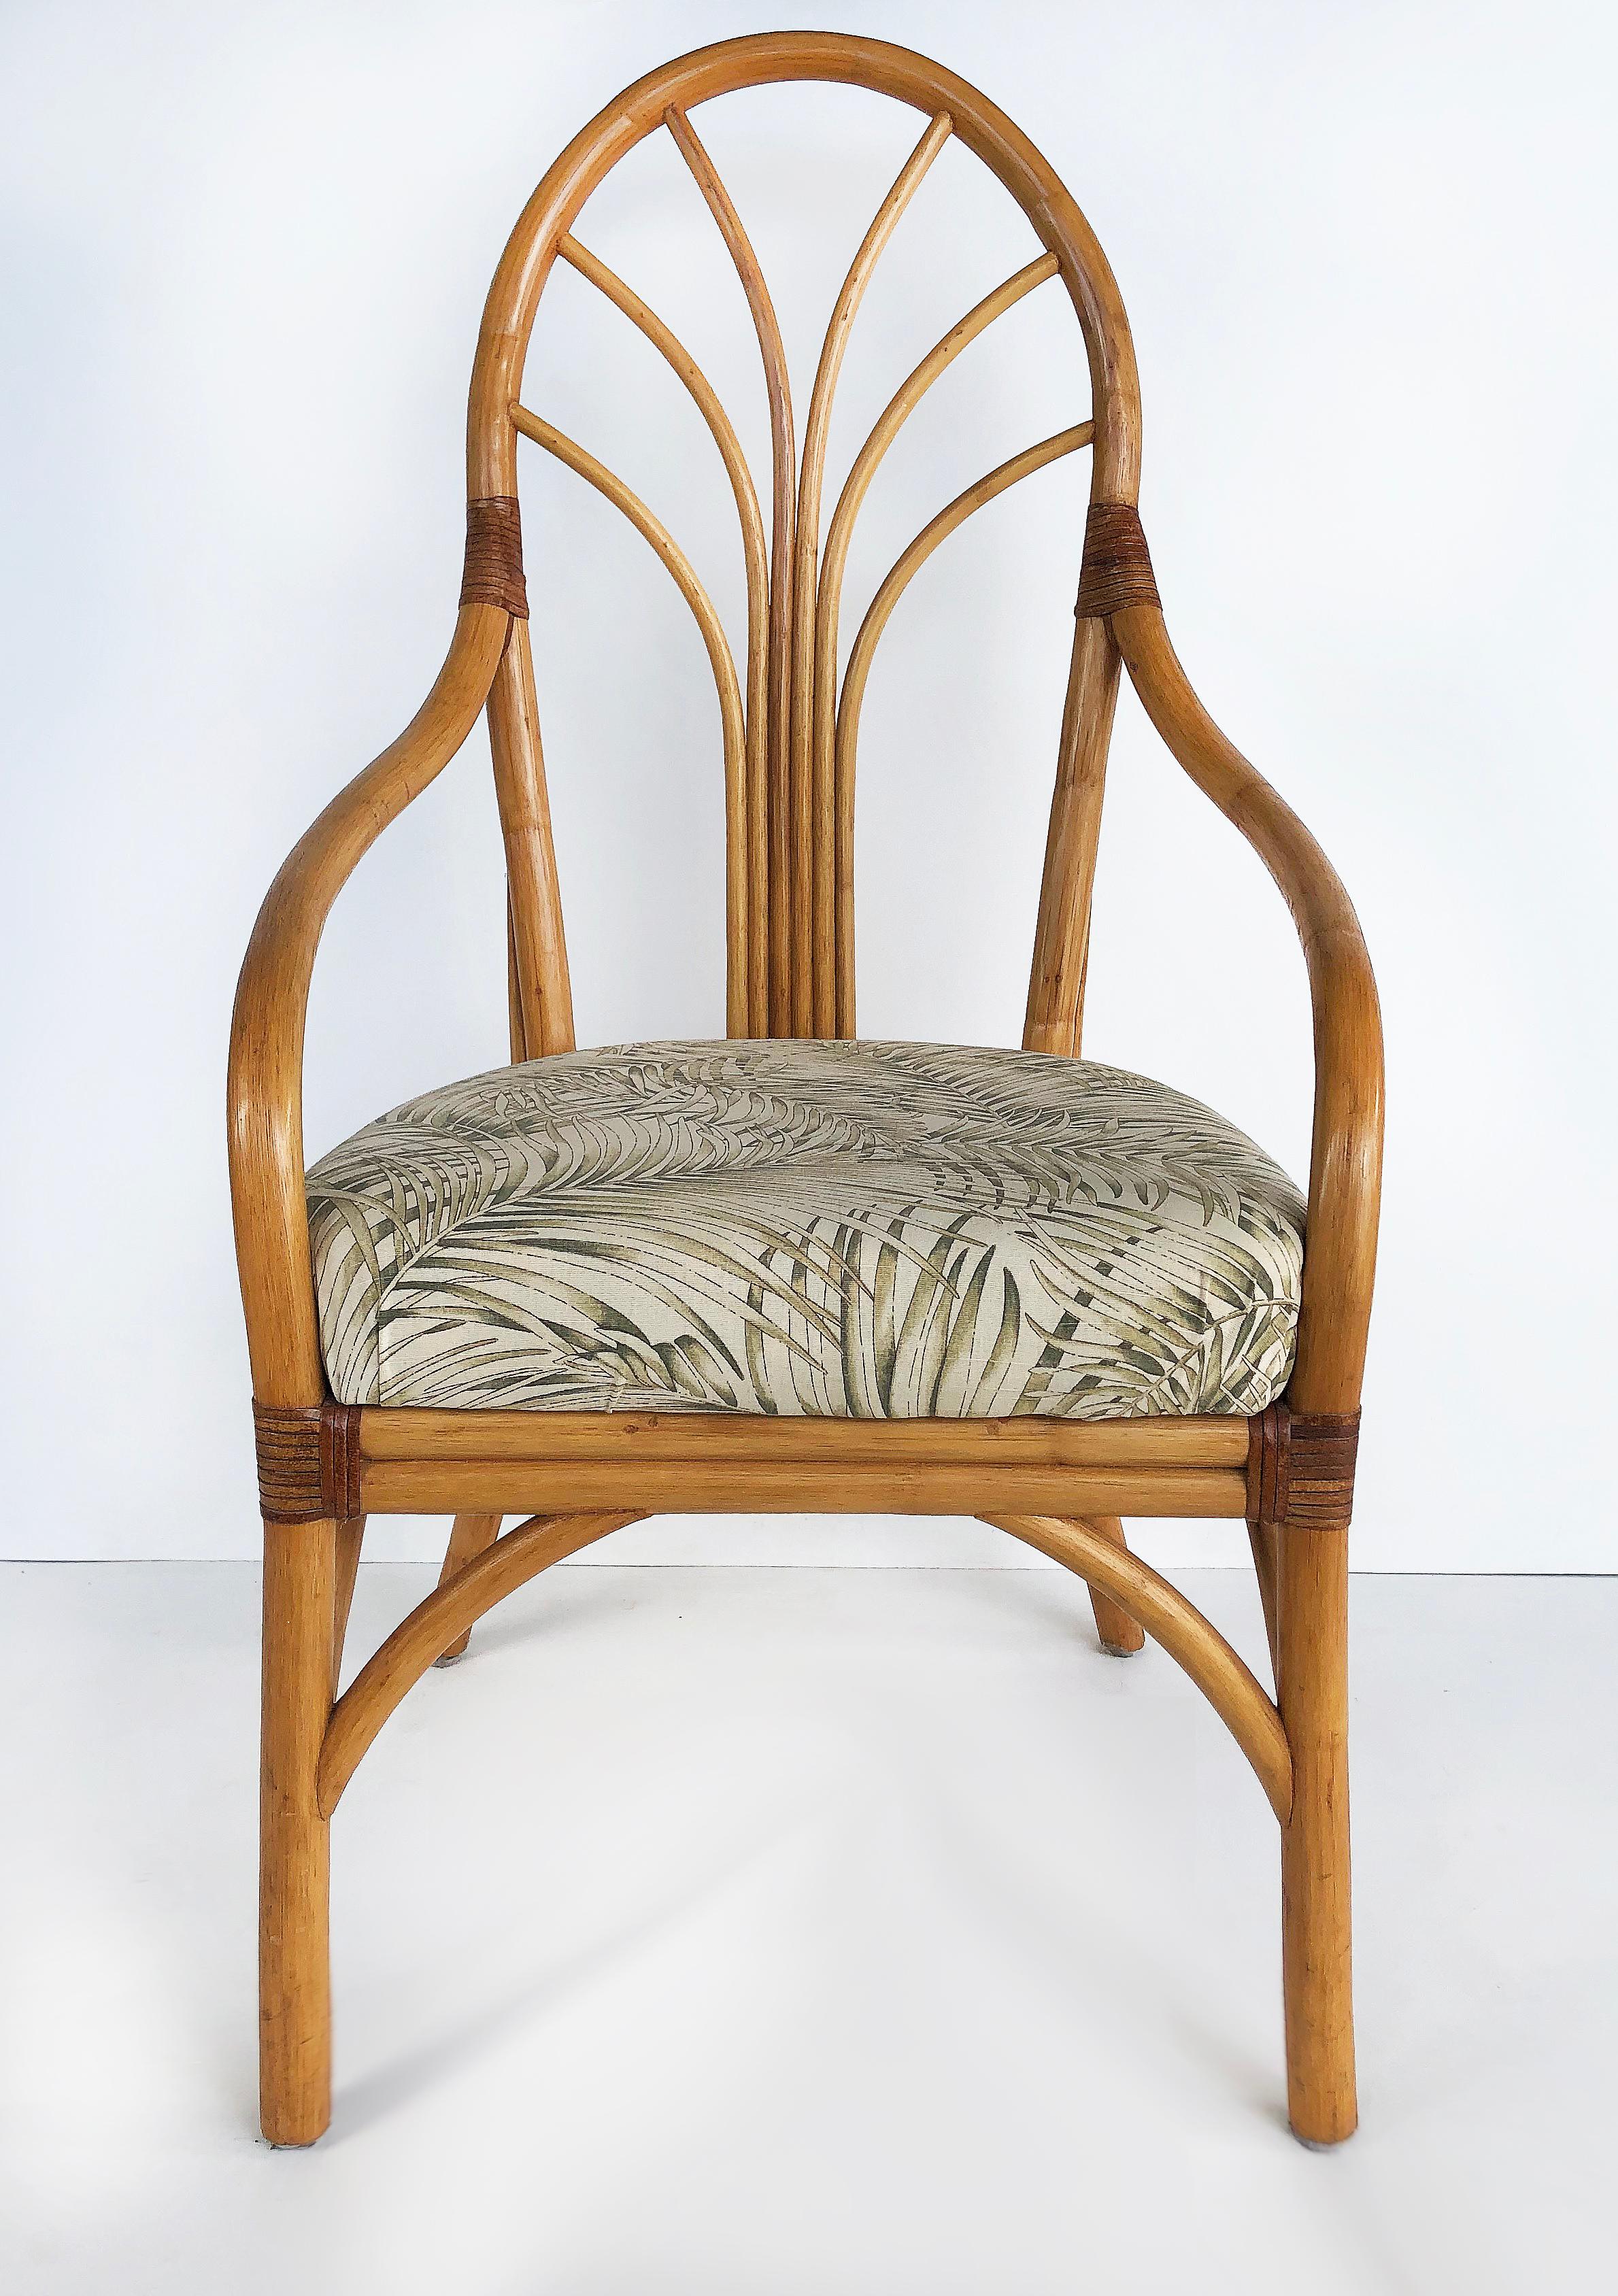 Vintage tropical bent rattan dining chairs, set of four

Offered for sale is a set of four bent rattan dining chairs with upholstered seats. The fabric and style of the chairs is tropical or coastal in style and all four of the chairs are armchairs.